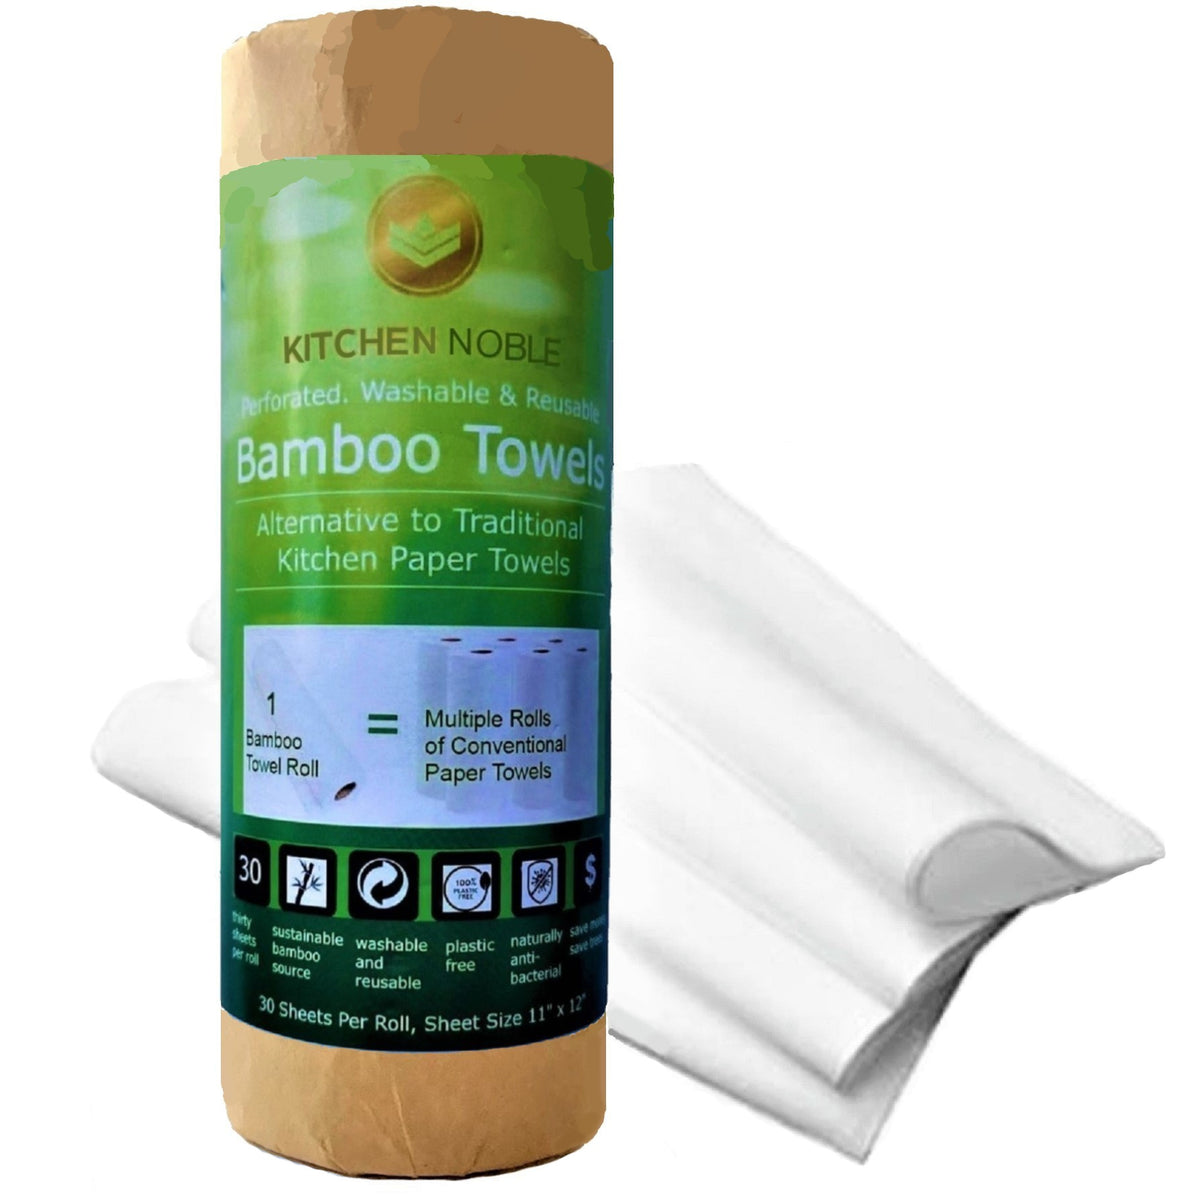 Bamboo Paper Towels